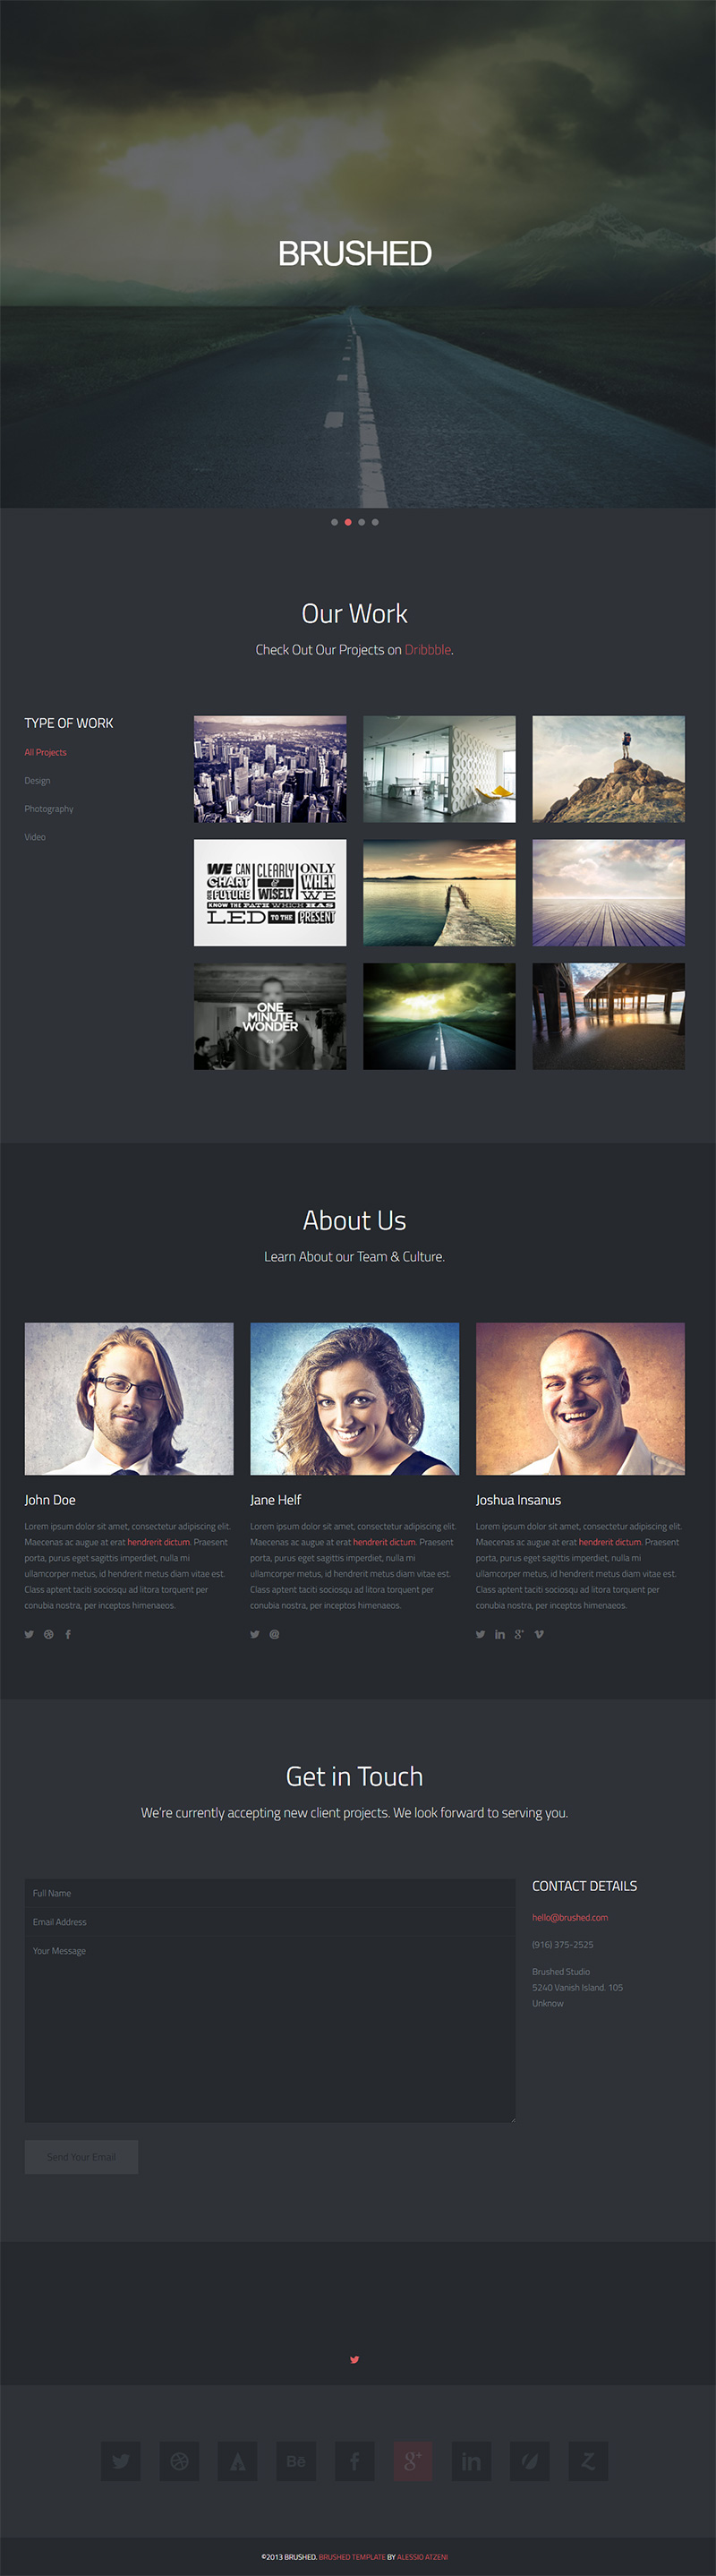 brushed-responsive-one-page-template